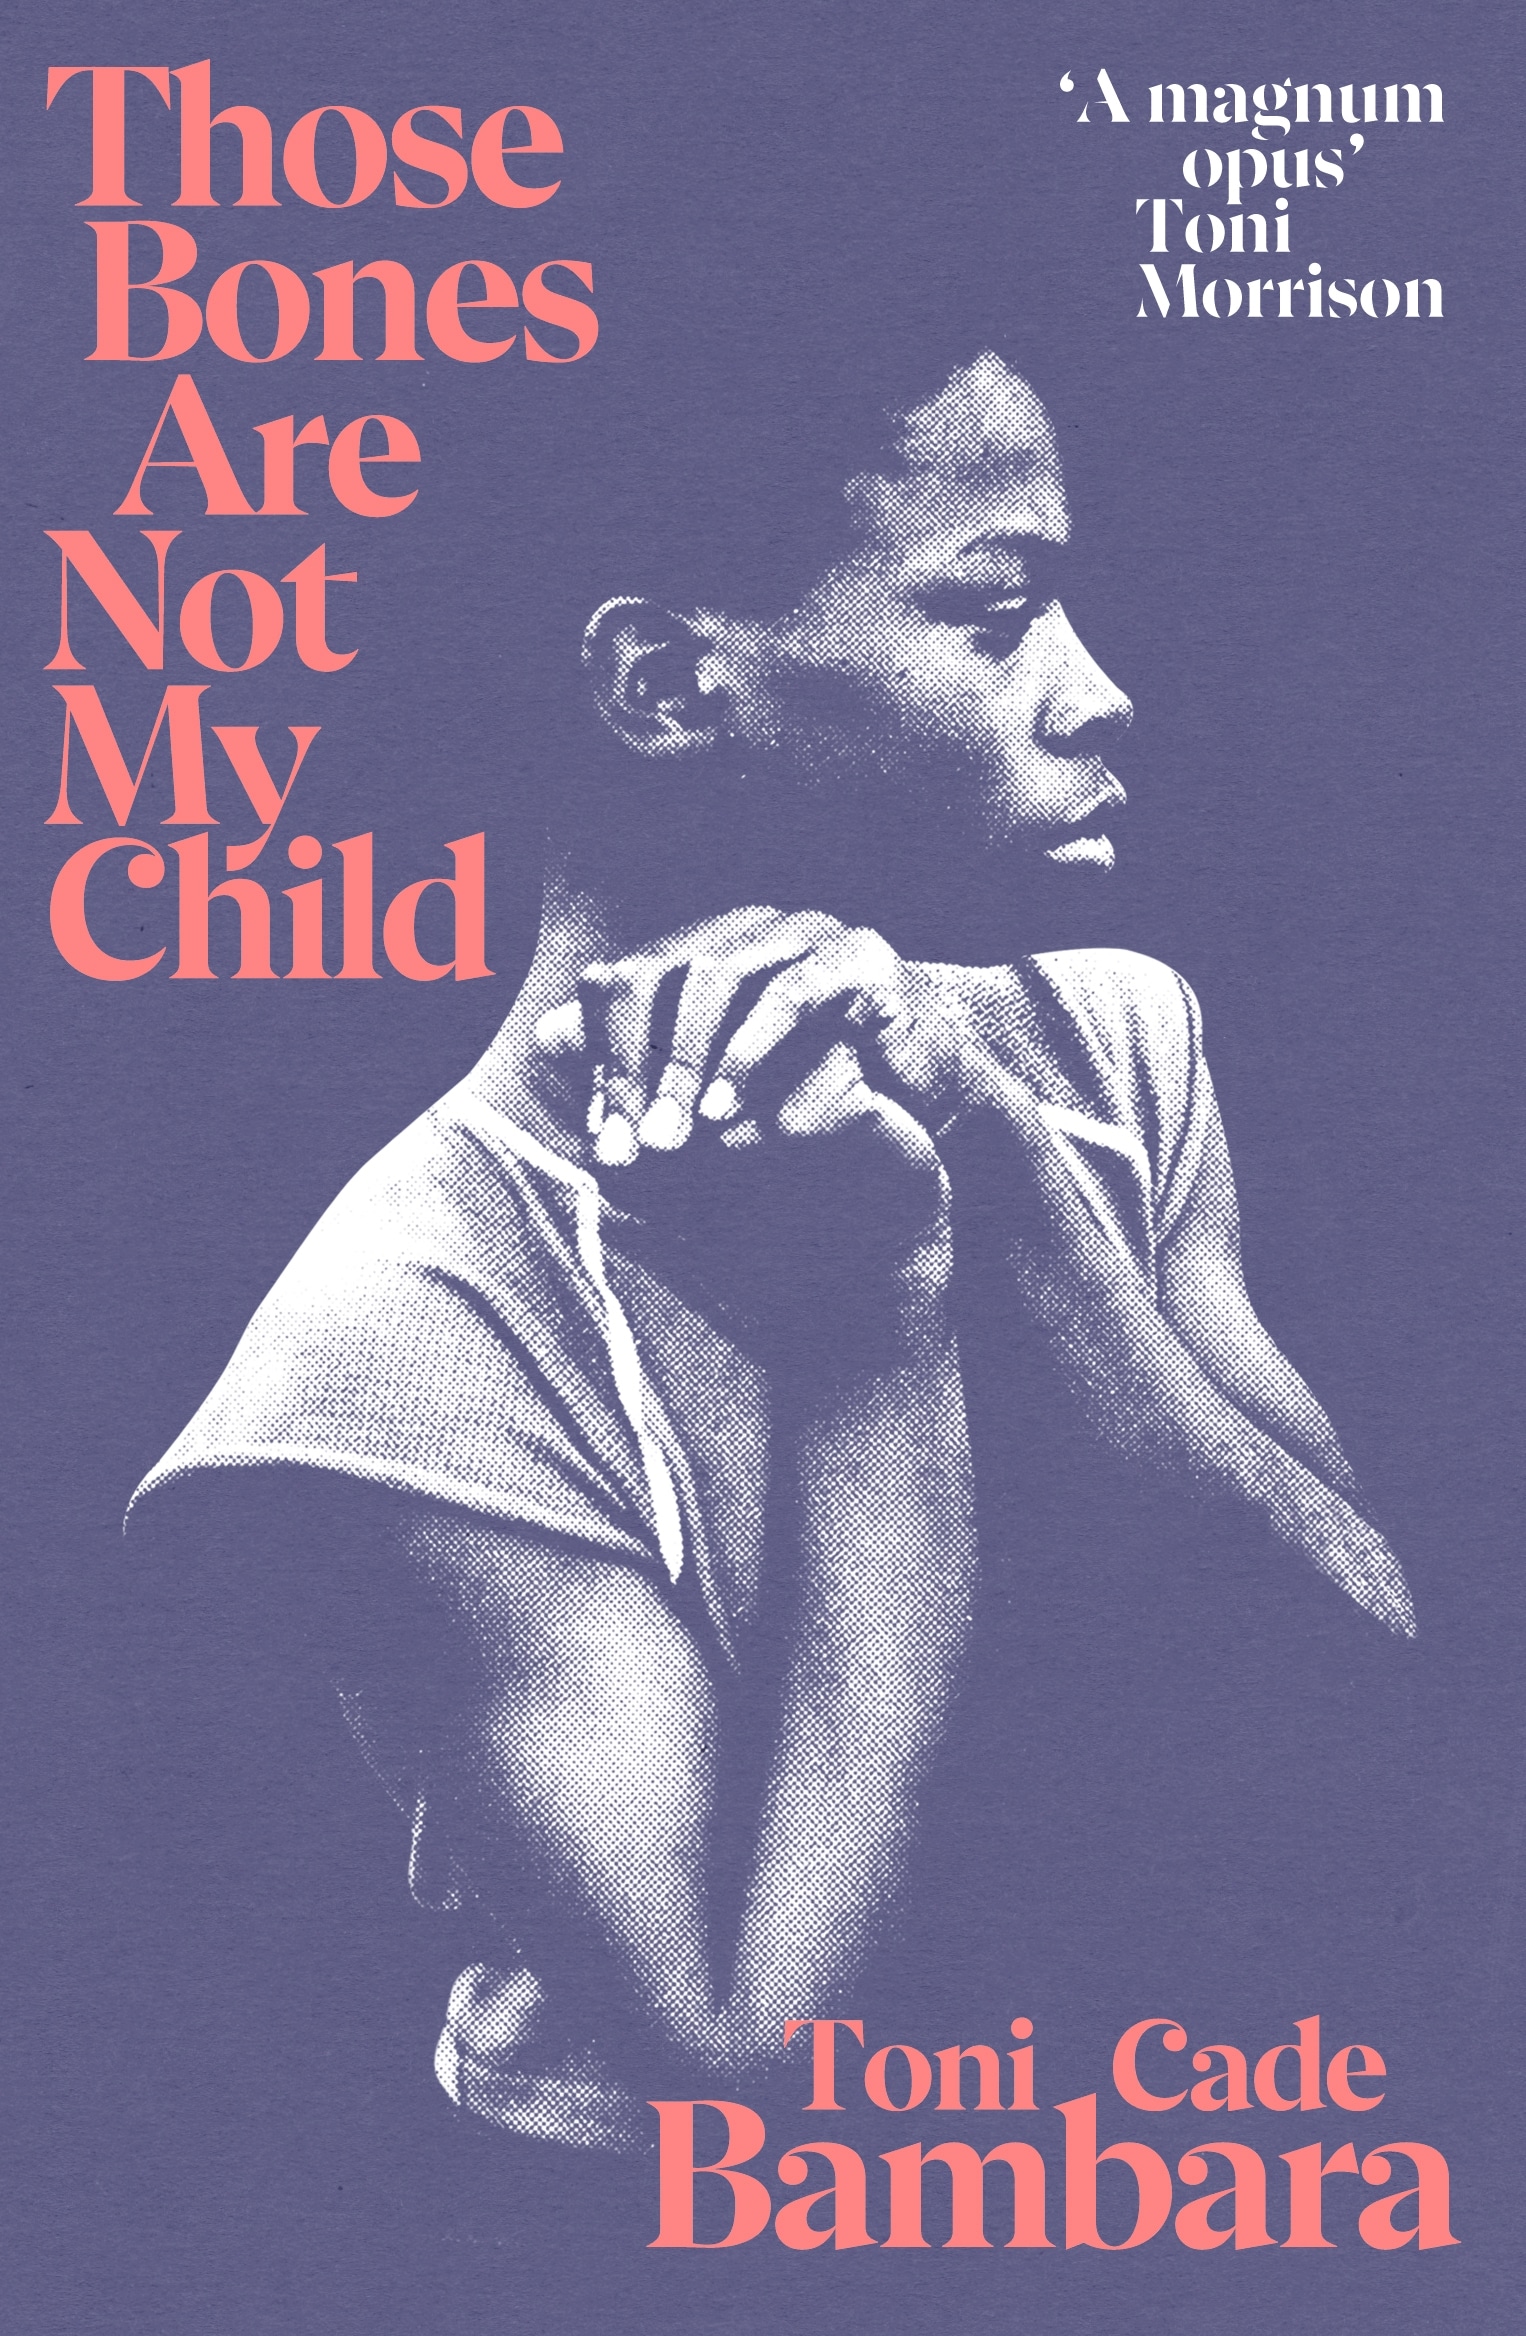 Book “Those Bones Are Not My Child” by Toni Cade Bambara — October 7, 2021